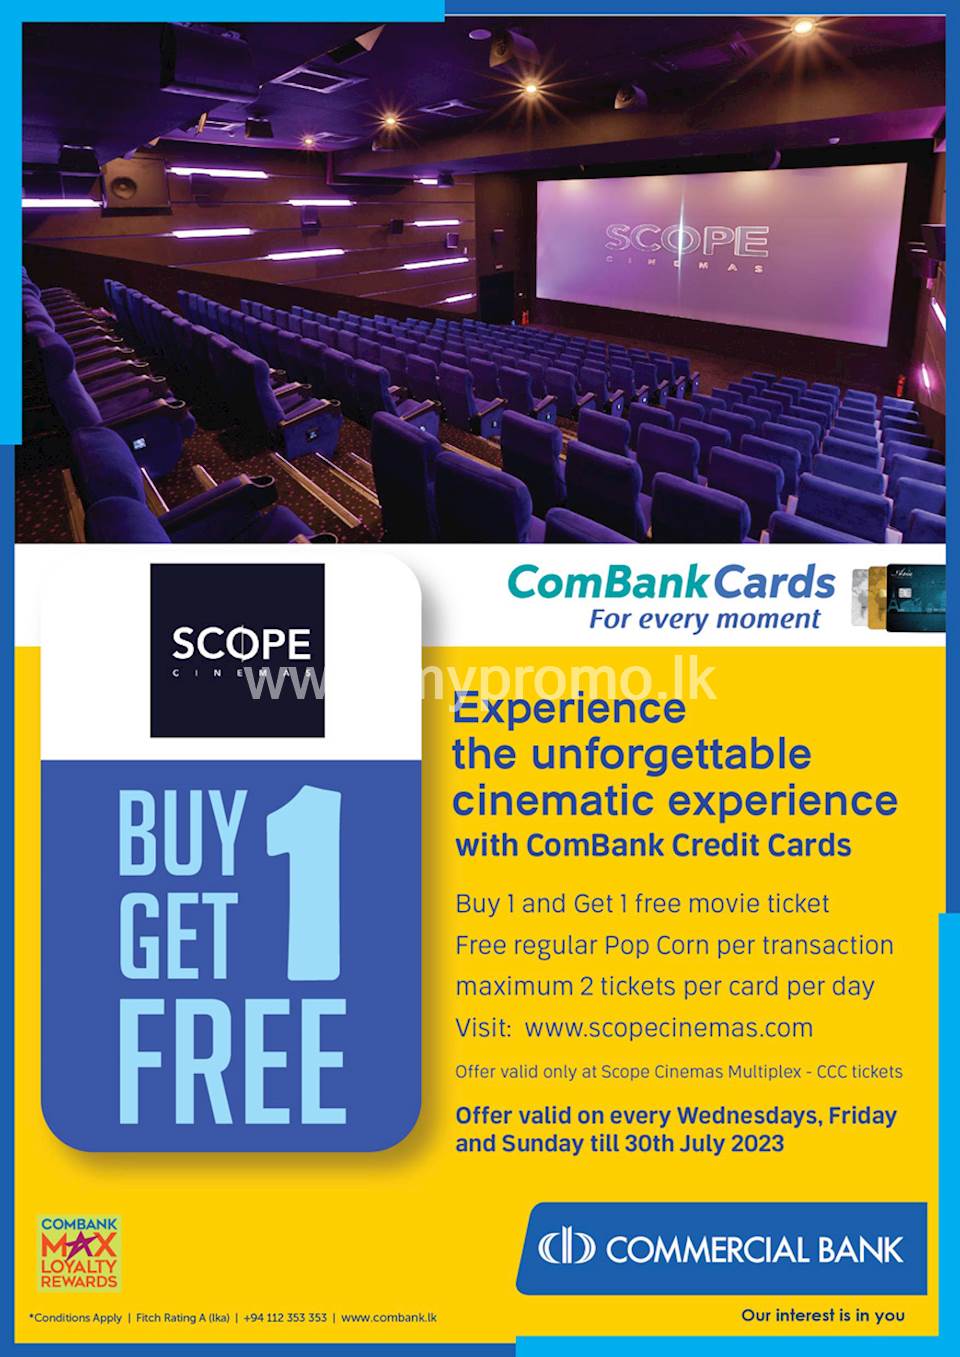  Buy 1 and Get 1 Free Movie Ticket for ComBank Credit Cards at Scope Cinemas